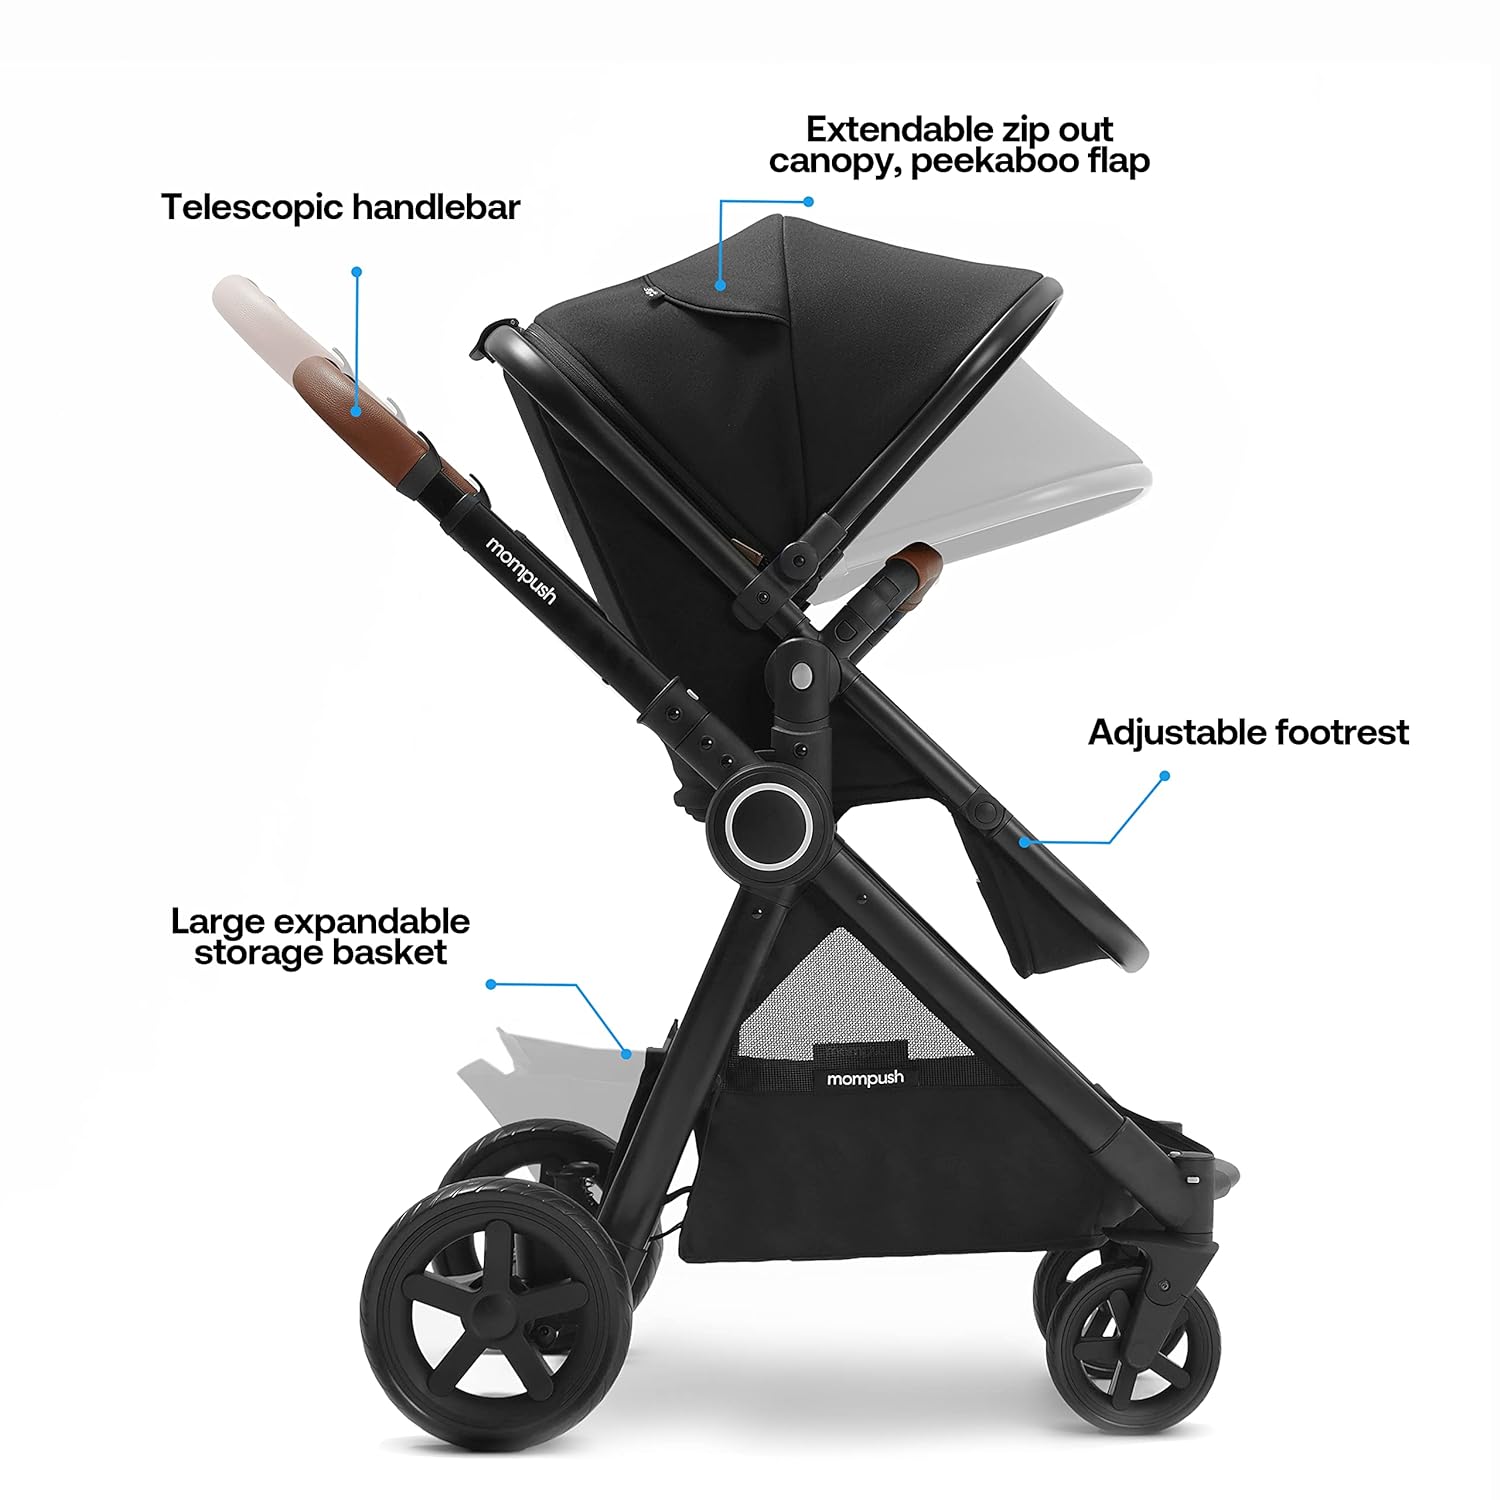 mompush Store Mompush Ultimate2 Full-Size Standard Stroller Independent Bassinet Reversible Seat Compact Self Standing Fold Large UPF50+ Canop